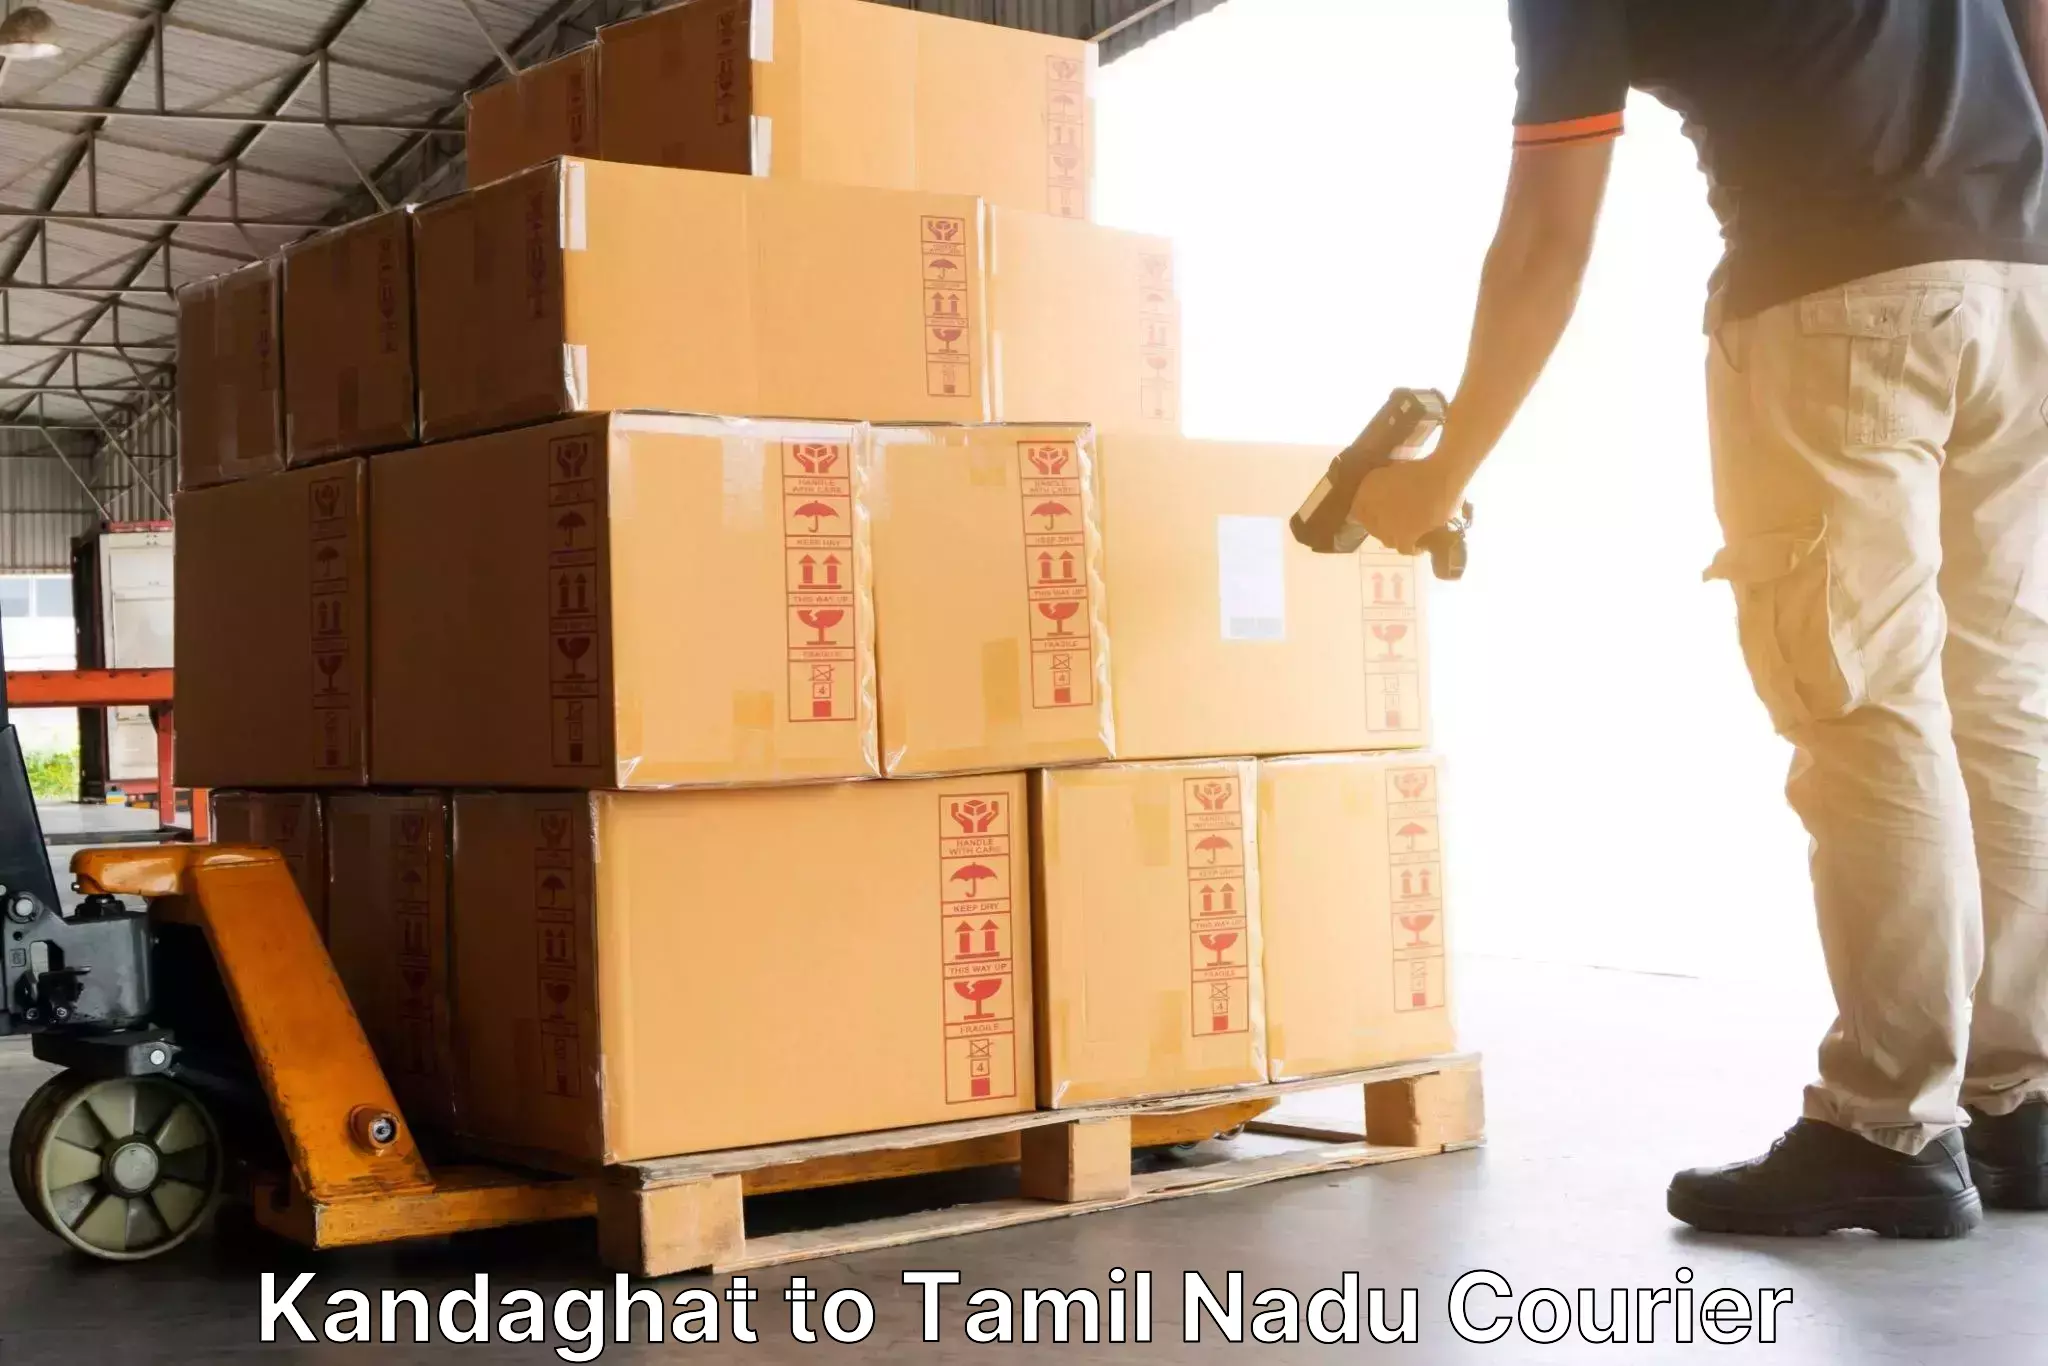 Courier service innovation in Kandaghat to Velur